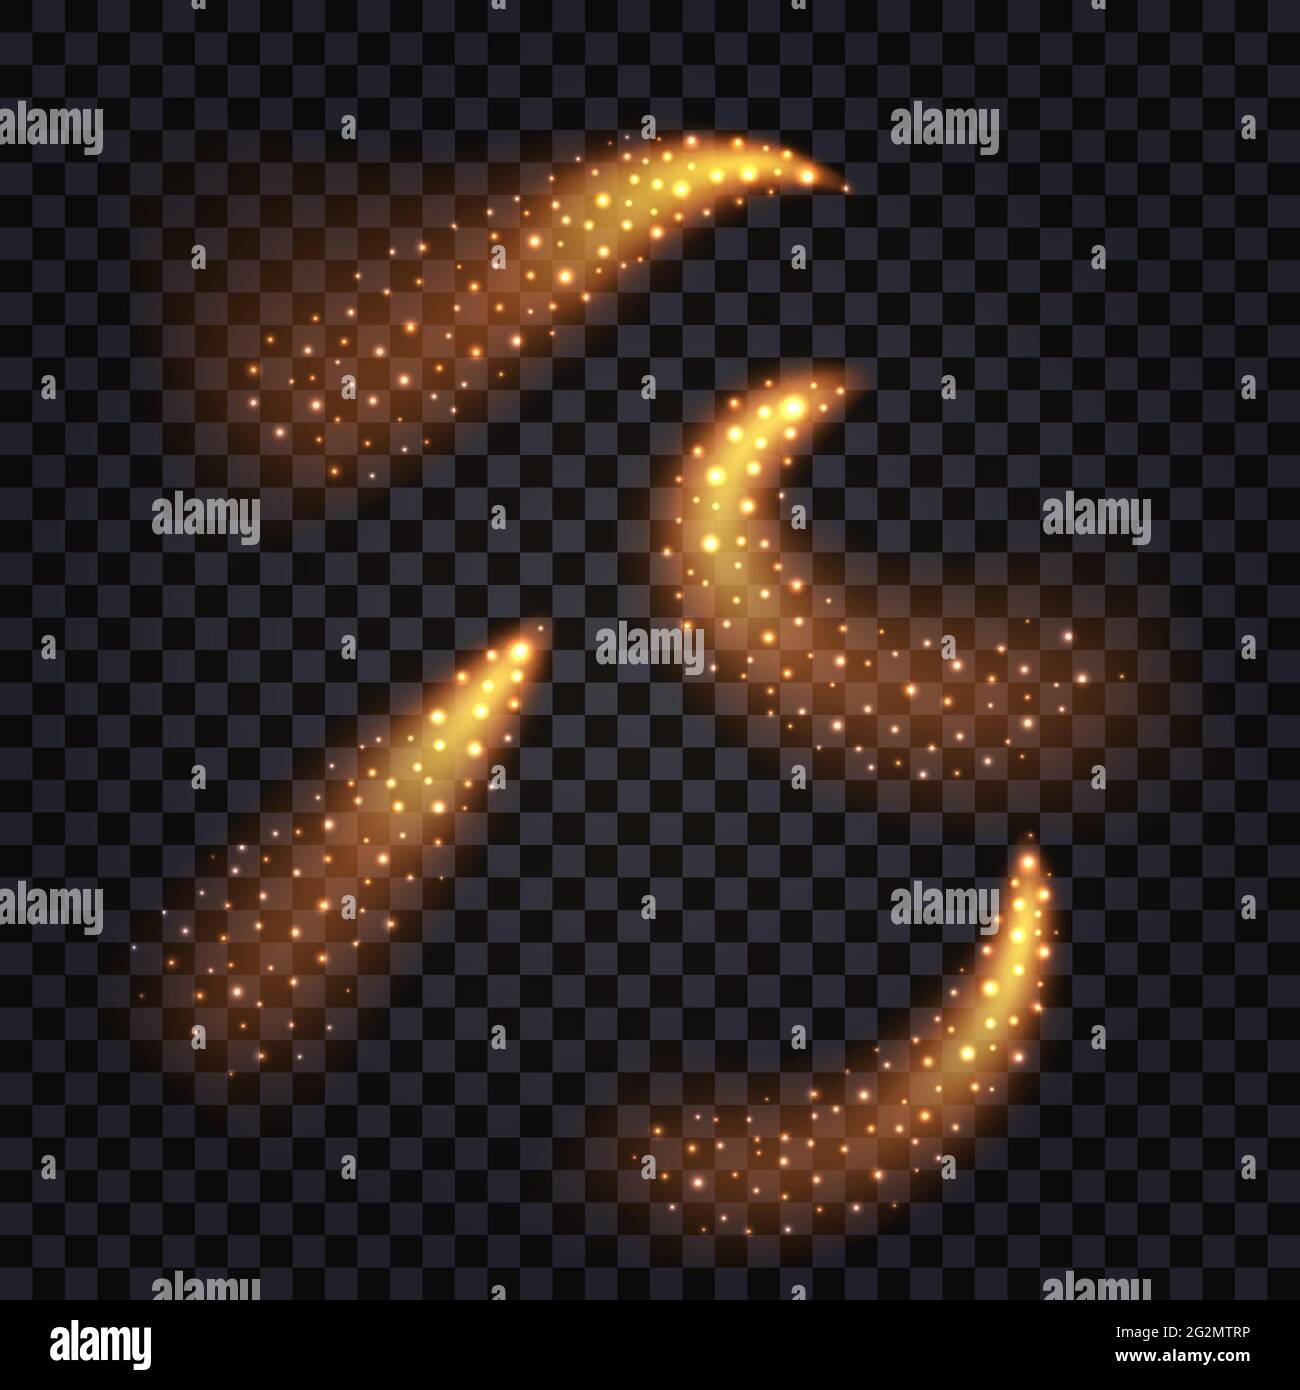 Fire trails, set of swirls with glowing light effect isolated on t5ransparent background siwth shiny sparkles. Comest or meteors in motion. Vector ill Stock Vector